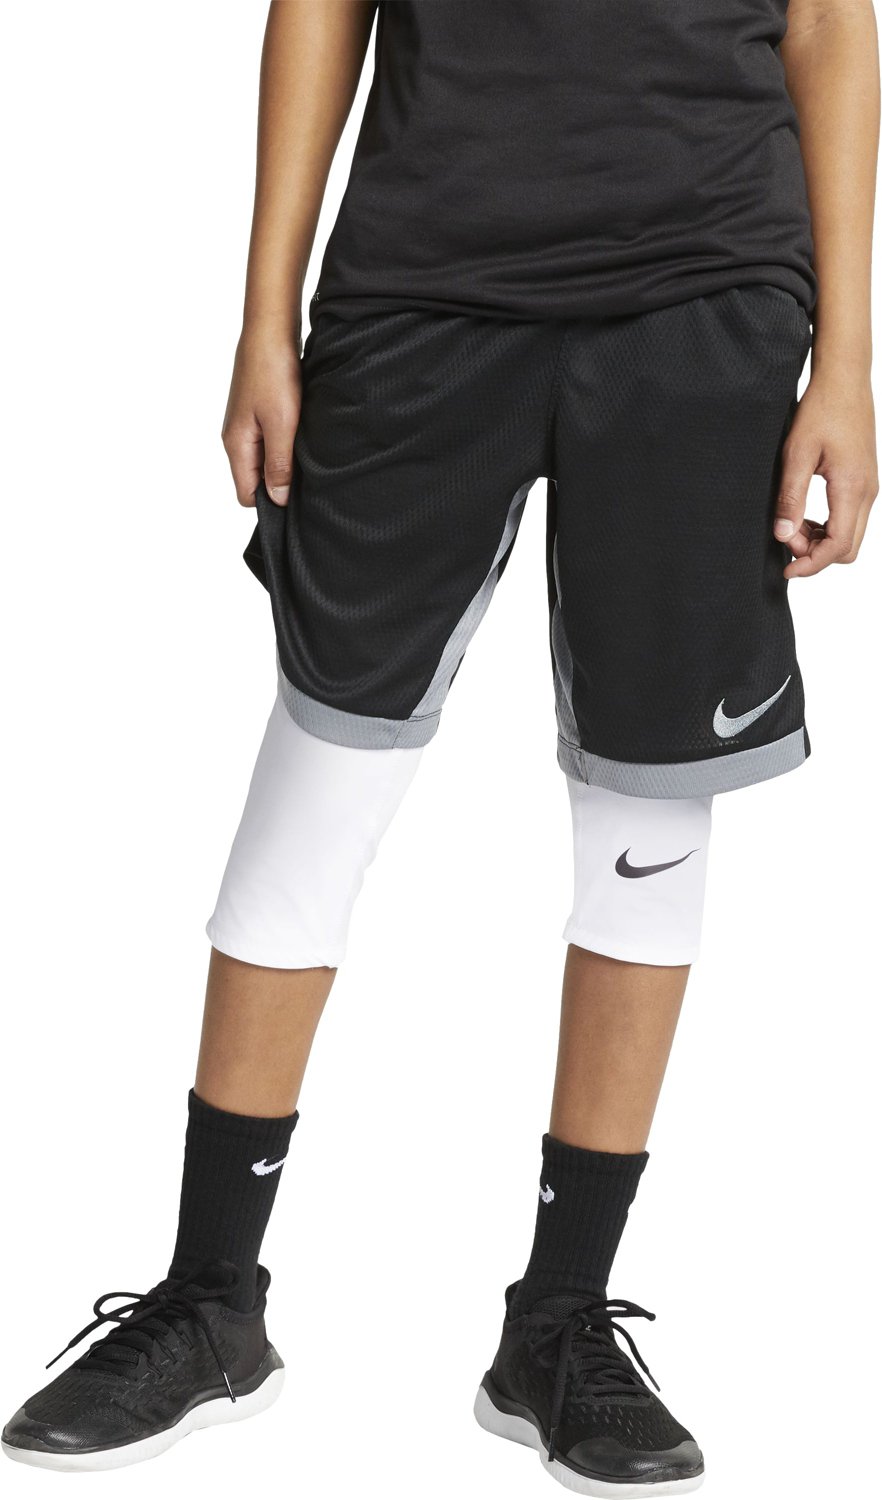 nike compression tights youth